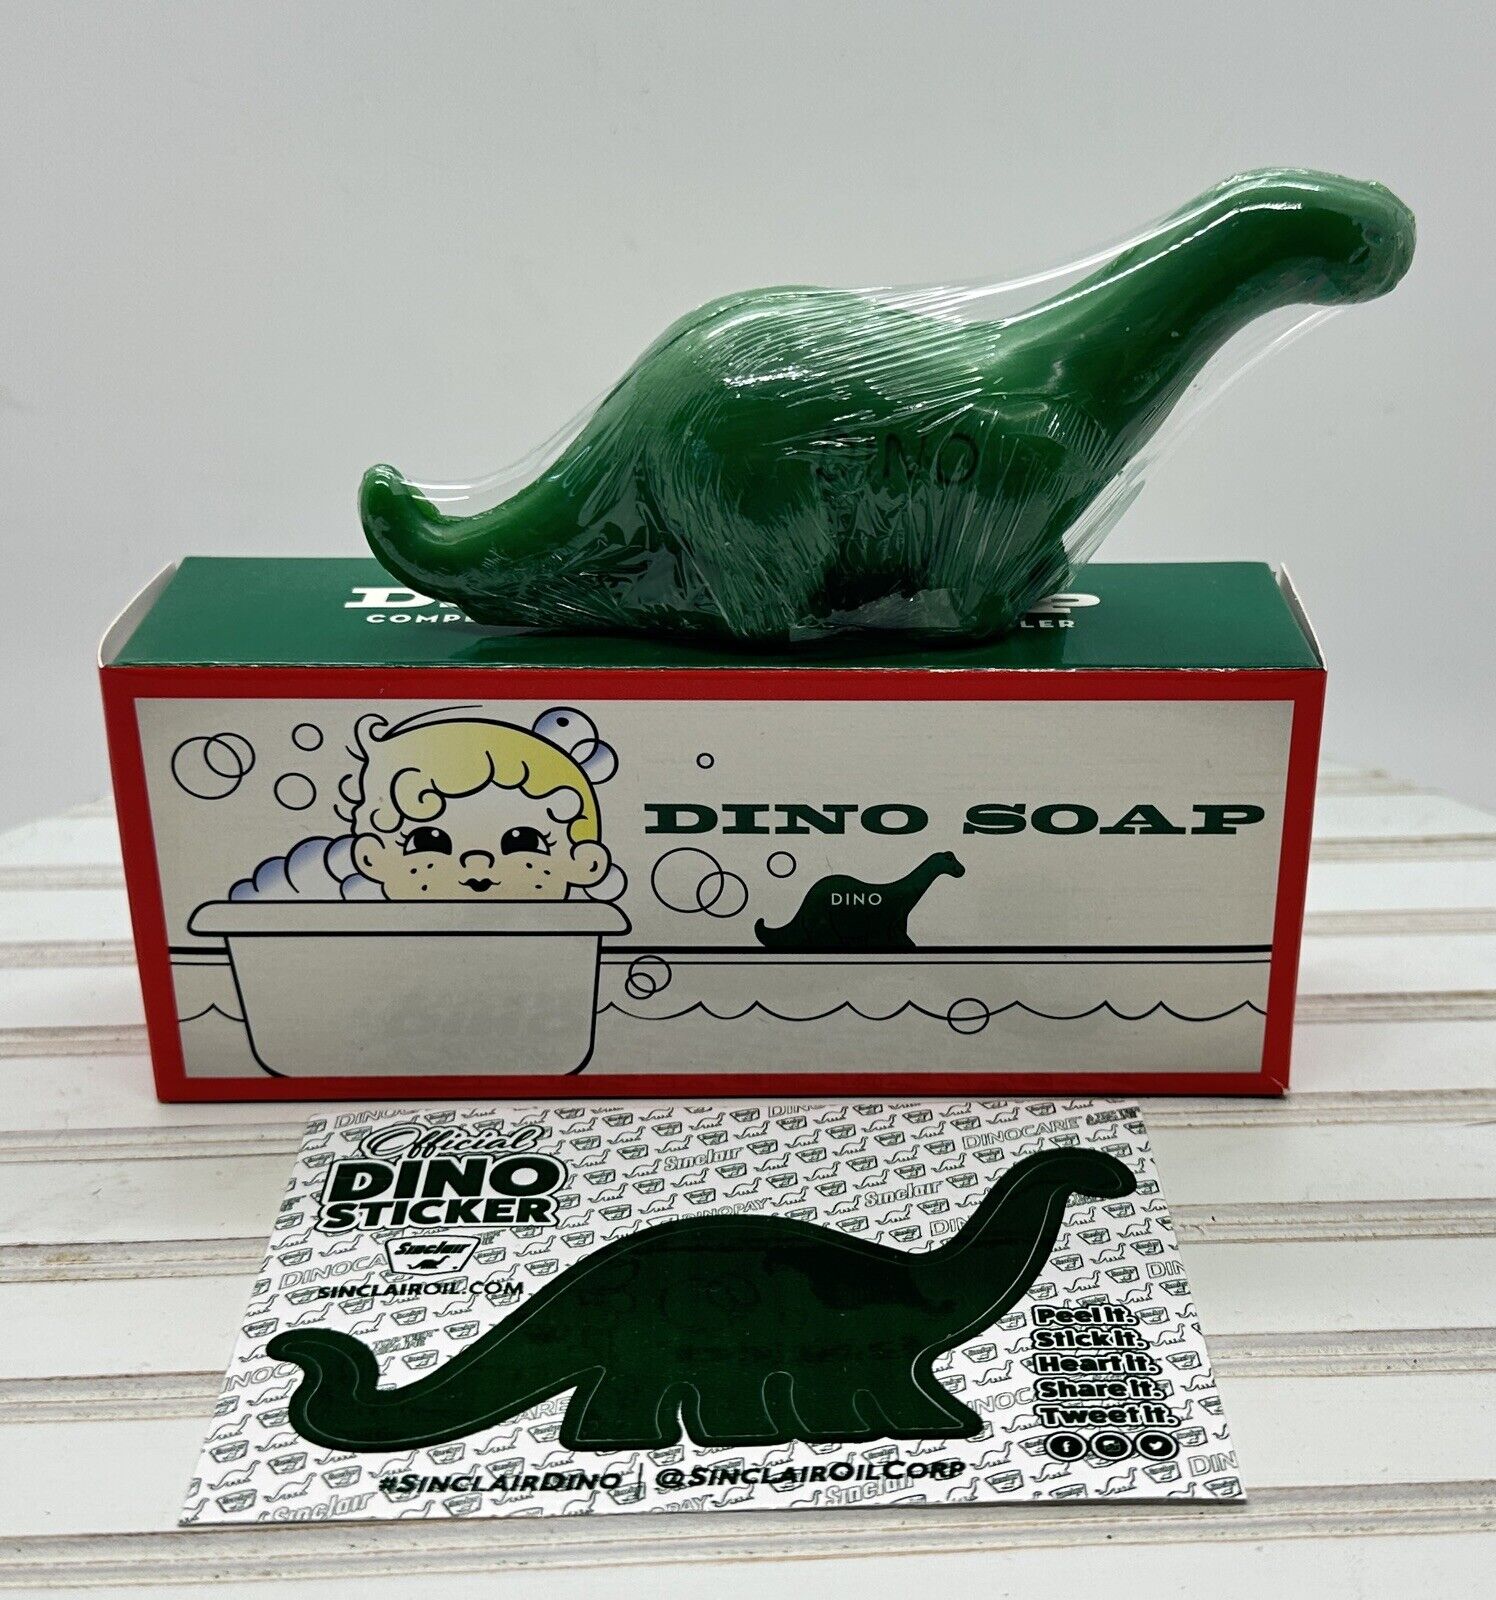 Sinclair Dino Soap Dealer Promotional Advertising Collectible Gas Oil Sign Green